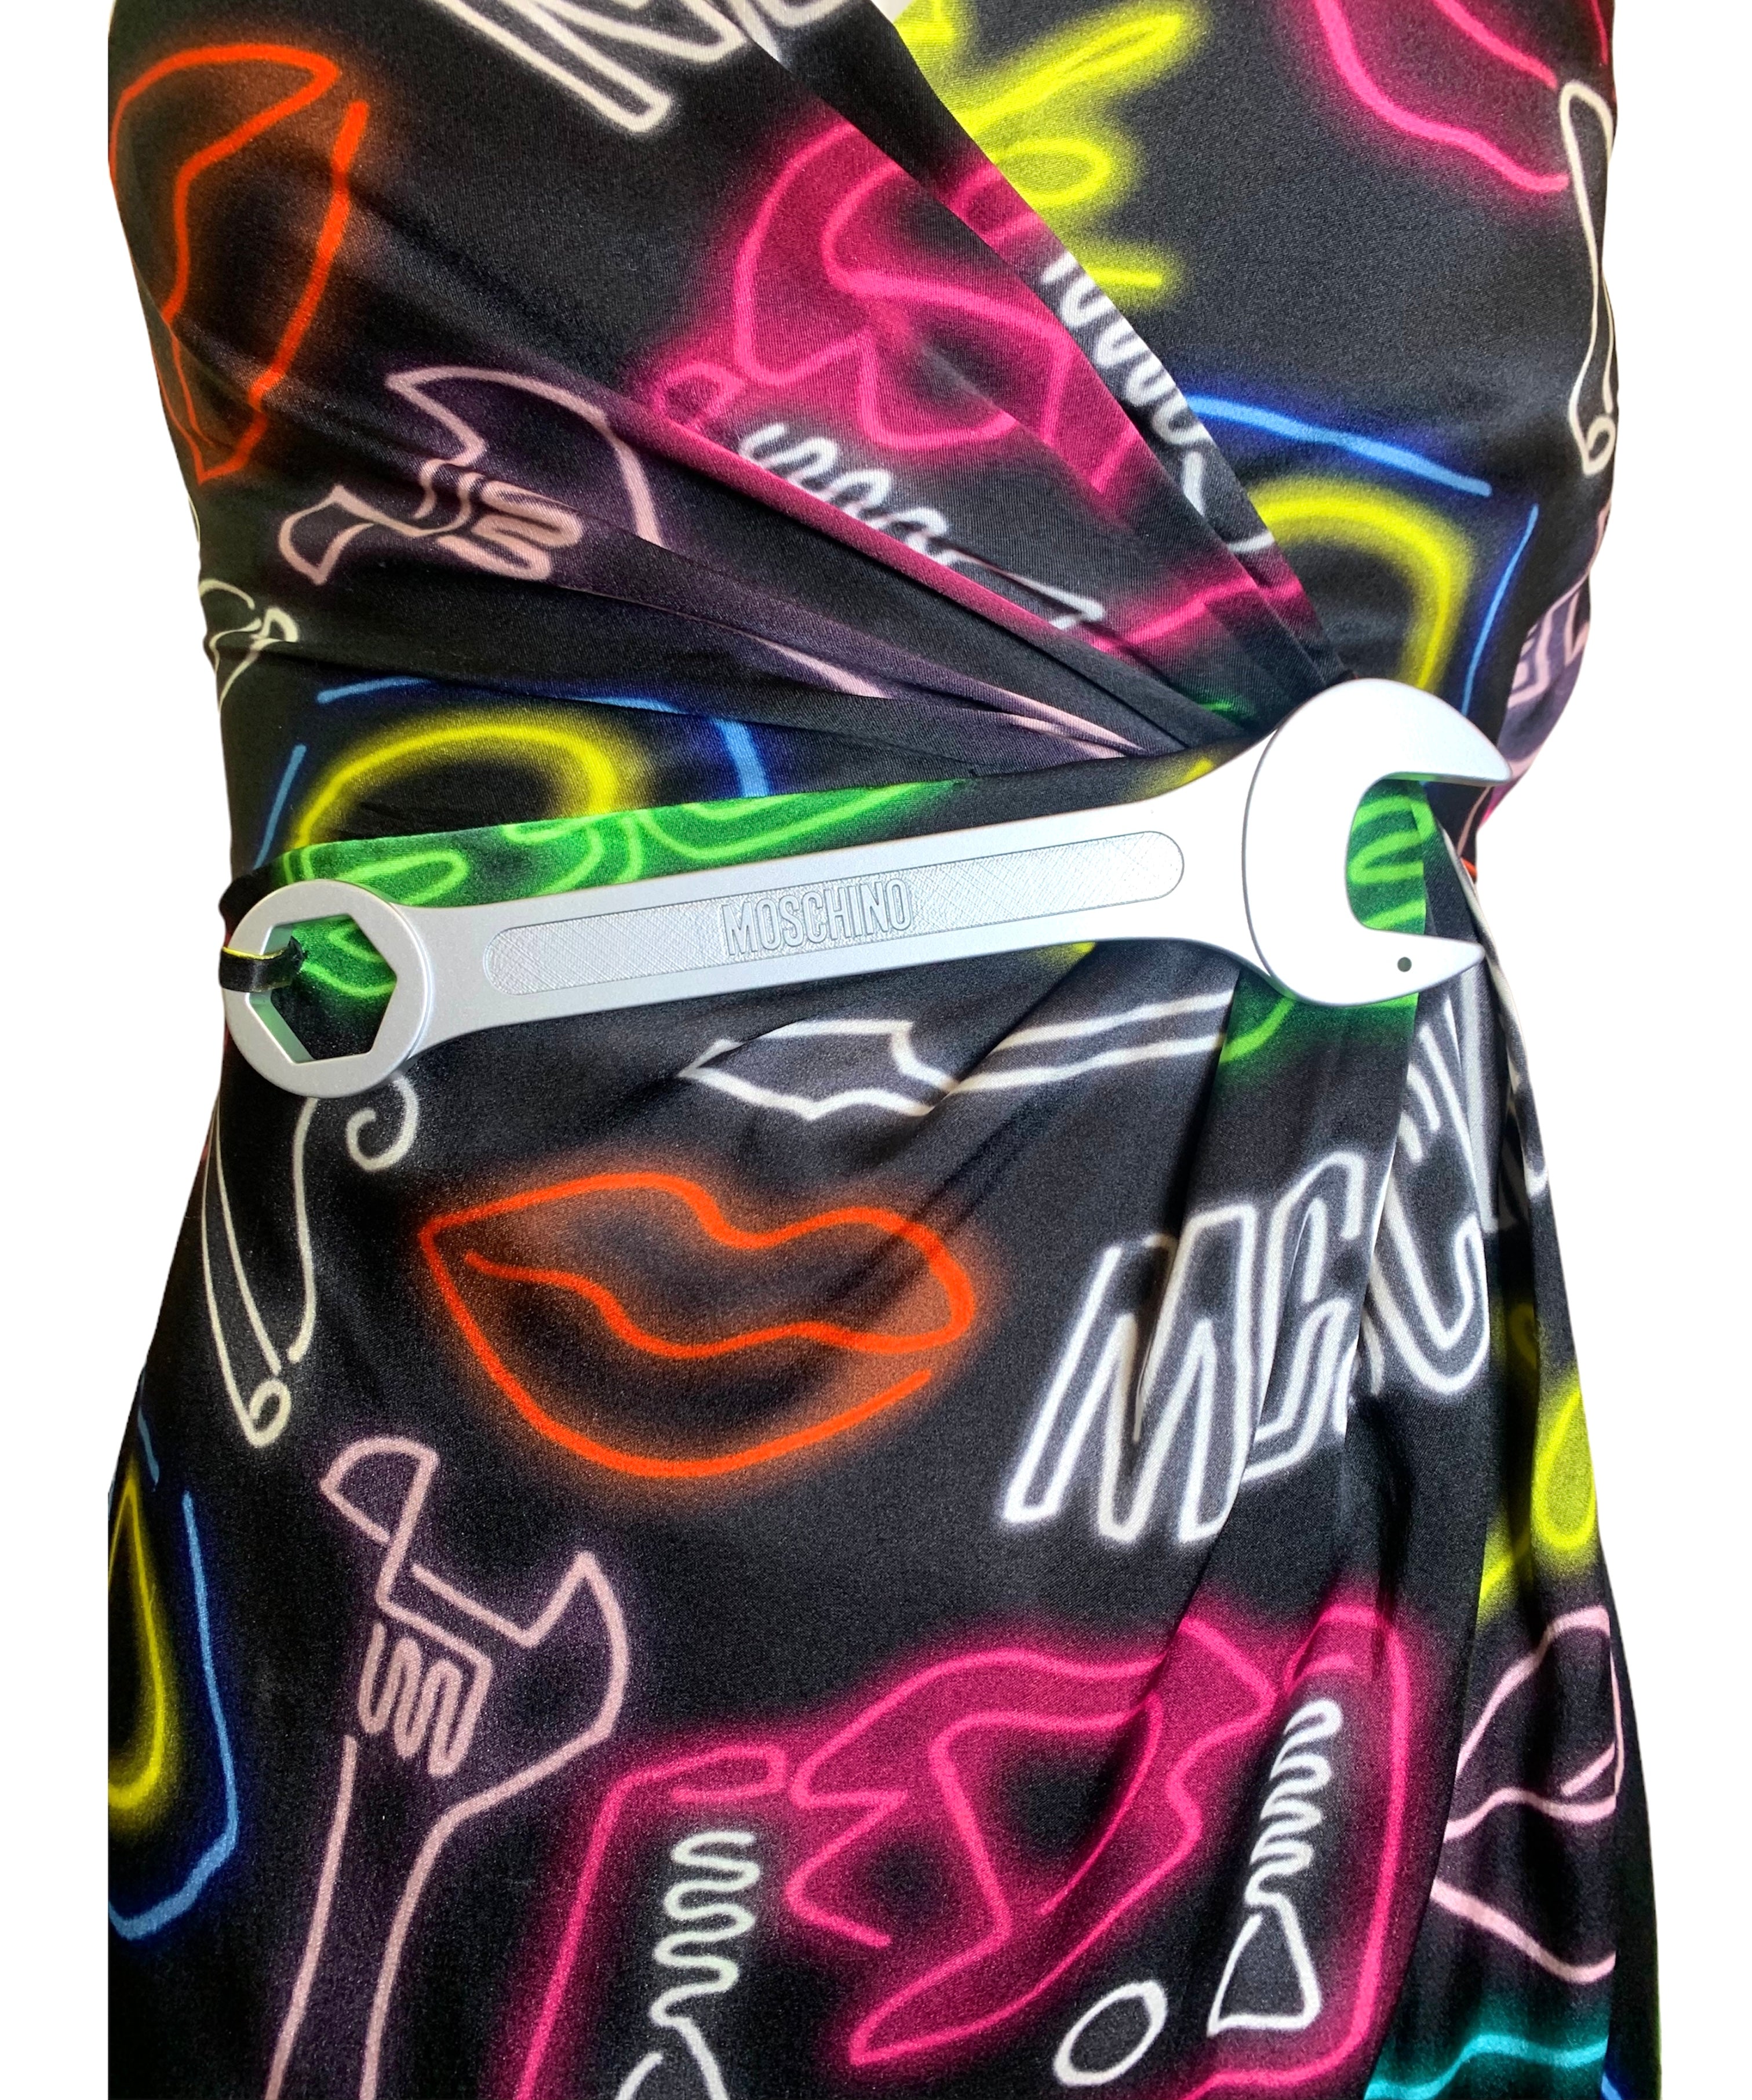 Moschino Couture SS 2016 Neon Sign Novelty Print Silk Gown FRONT DETAIL